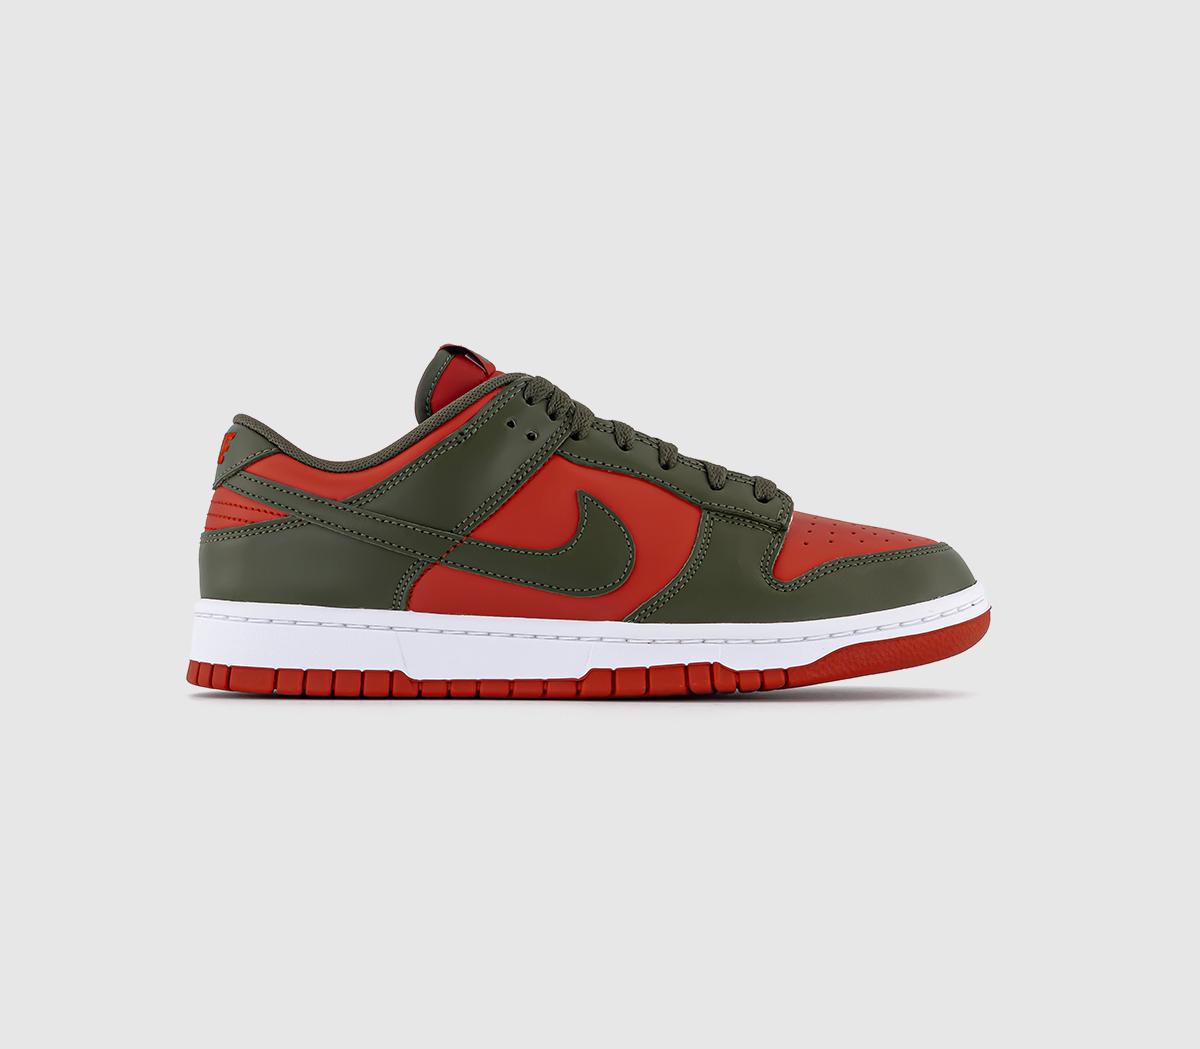 Nike Mens Dunk Low Trainers Mystic Red Cargo Khaki Mystic Red White Cargo Kaha, 10.5